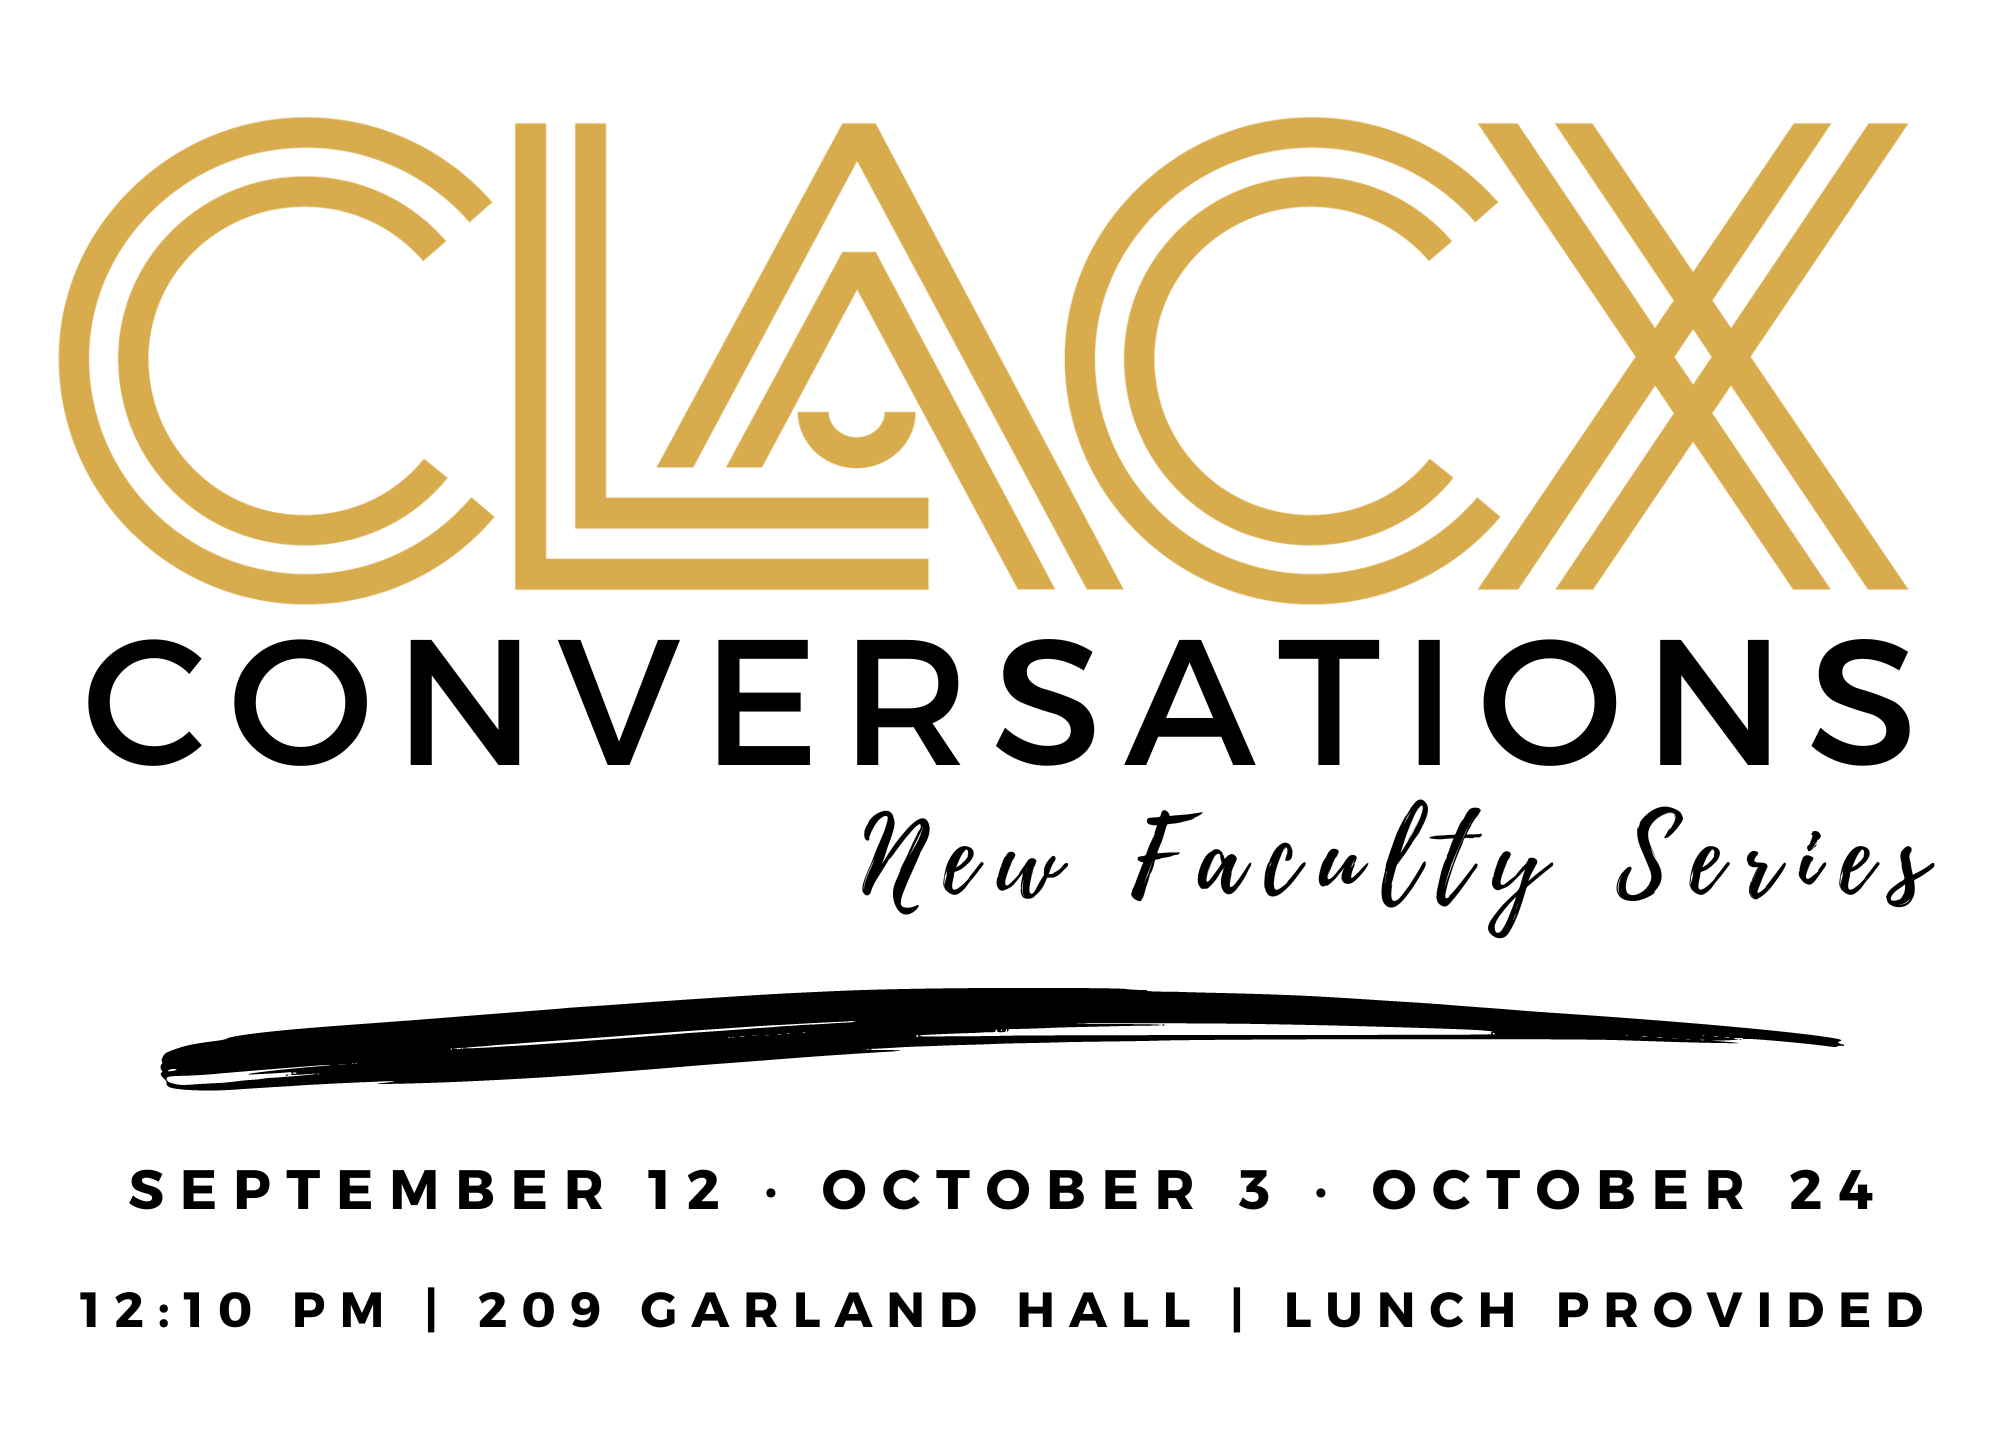 CLACX Conversations: New Faculty Series continues Oct. 3